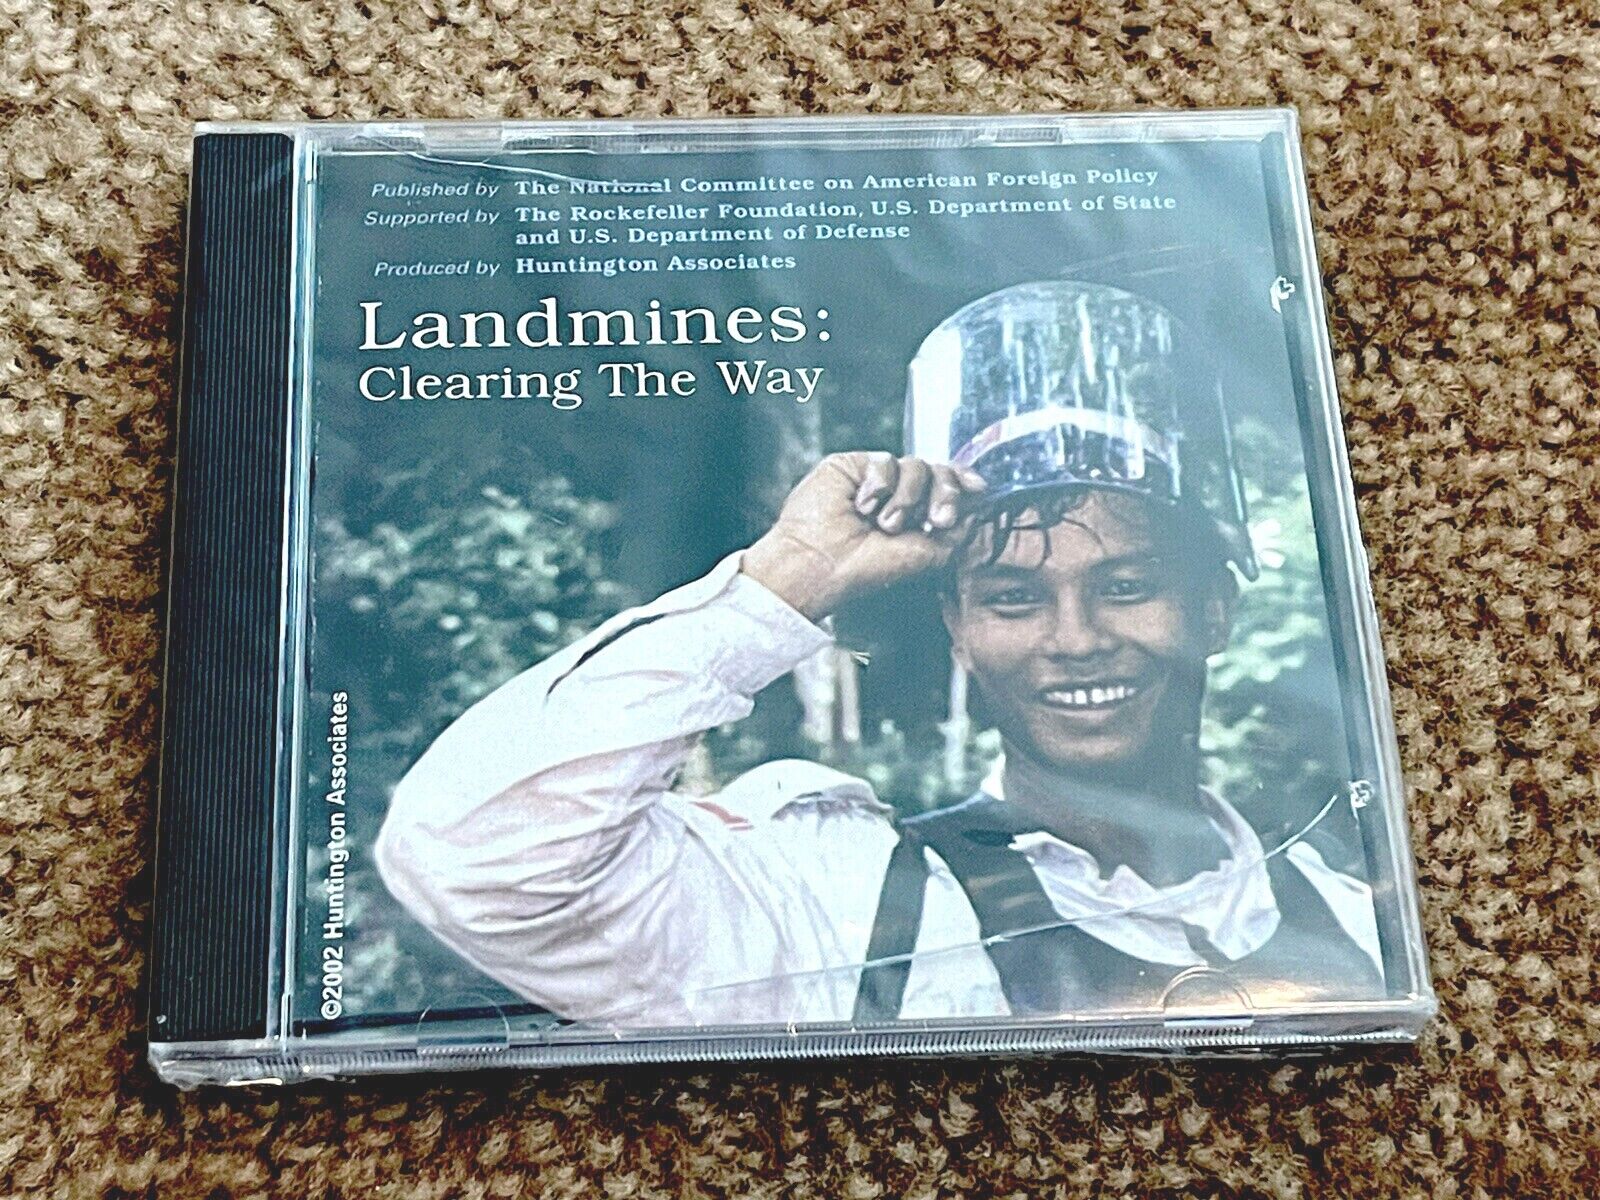 Landmines: Clearing The Way  Documentary Win/Mac CD-ROM  (New Sealed)